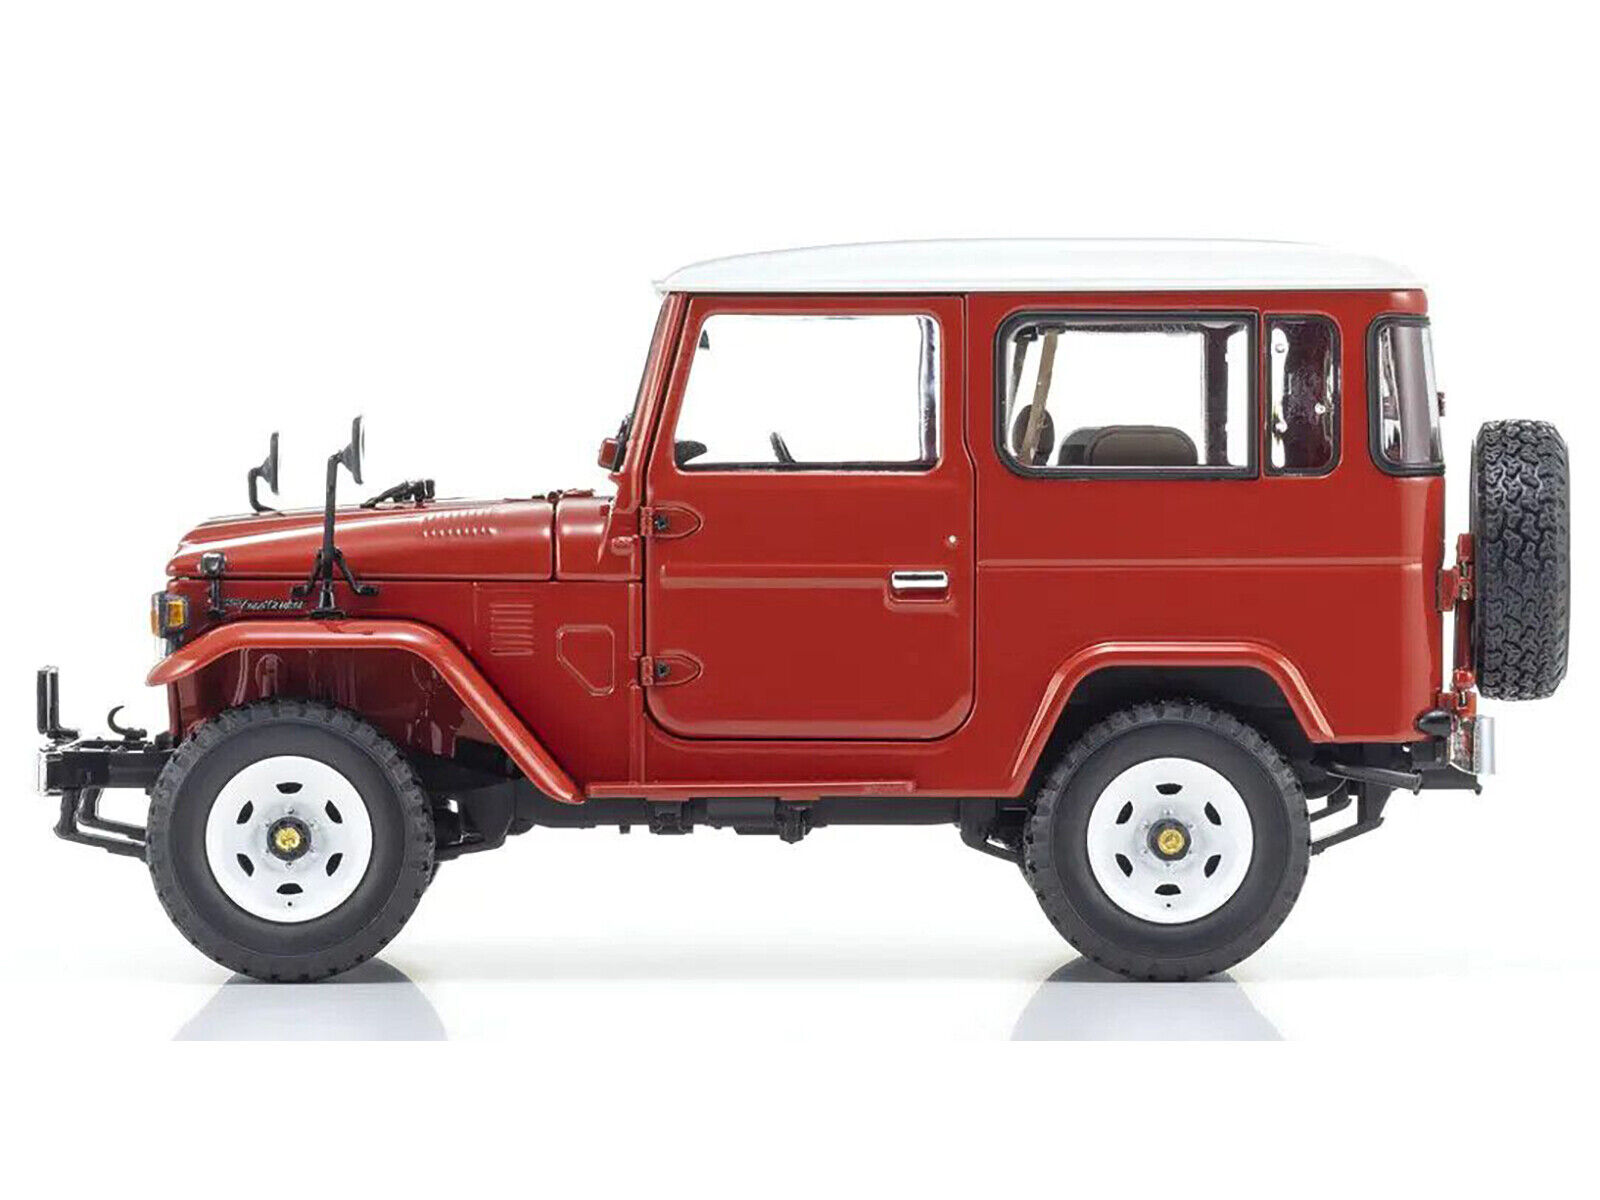 Toyota Land Cruiser 40 Van RHD (Right Hand Drive) Red with White Top 1/18